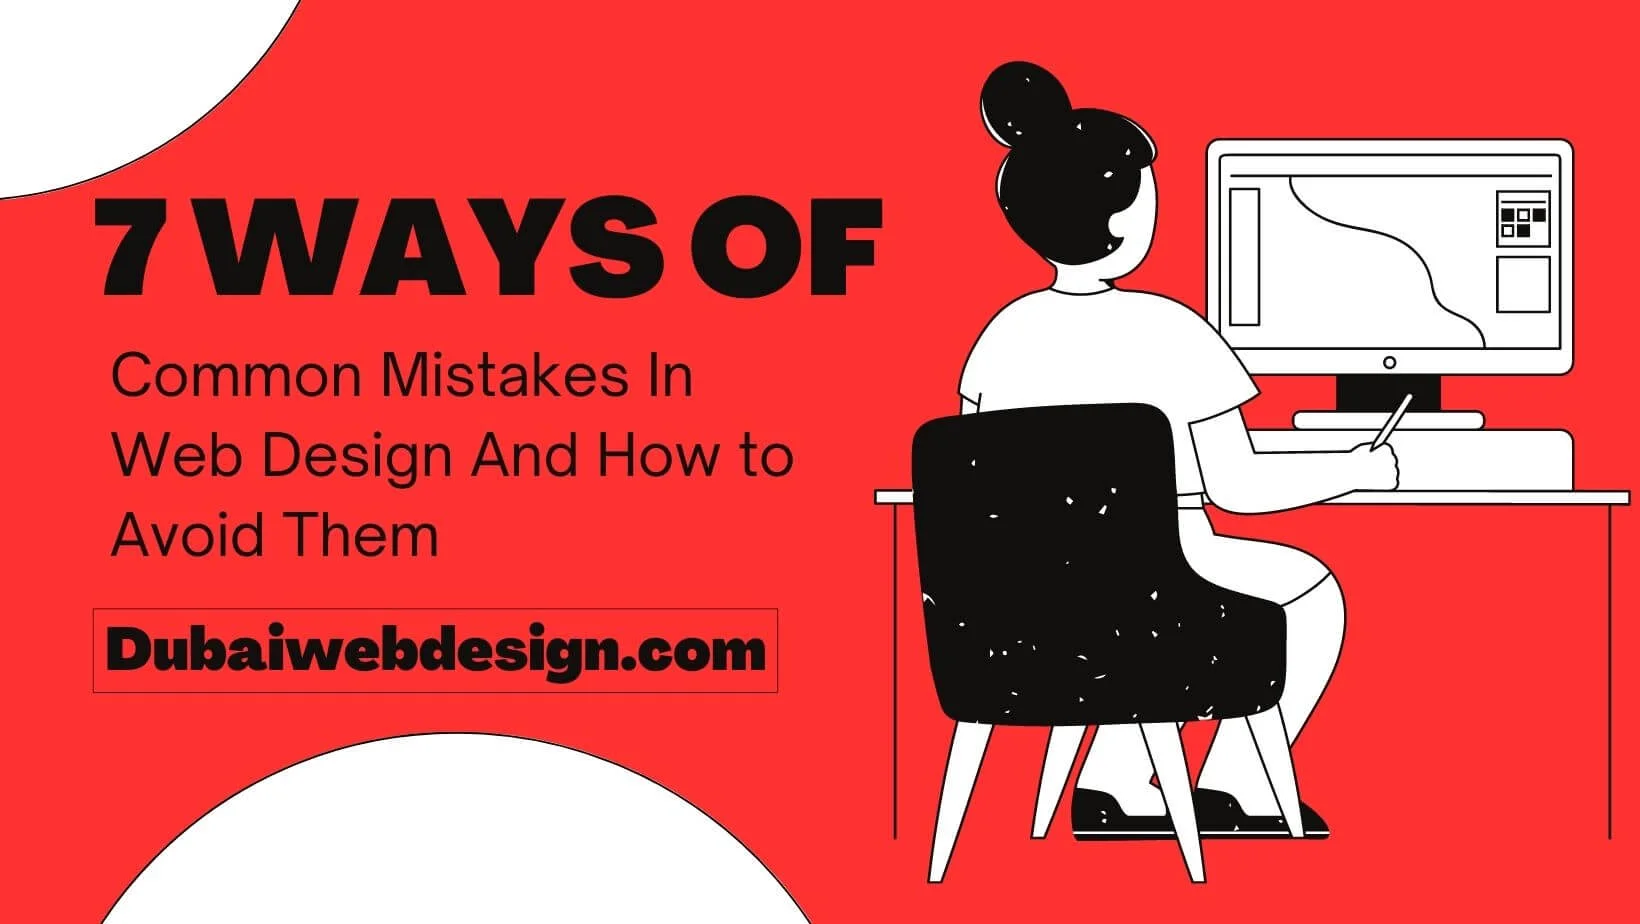 7 Ways Of Common Mistakes In Web Design And How to Avoid Them